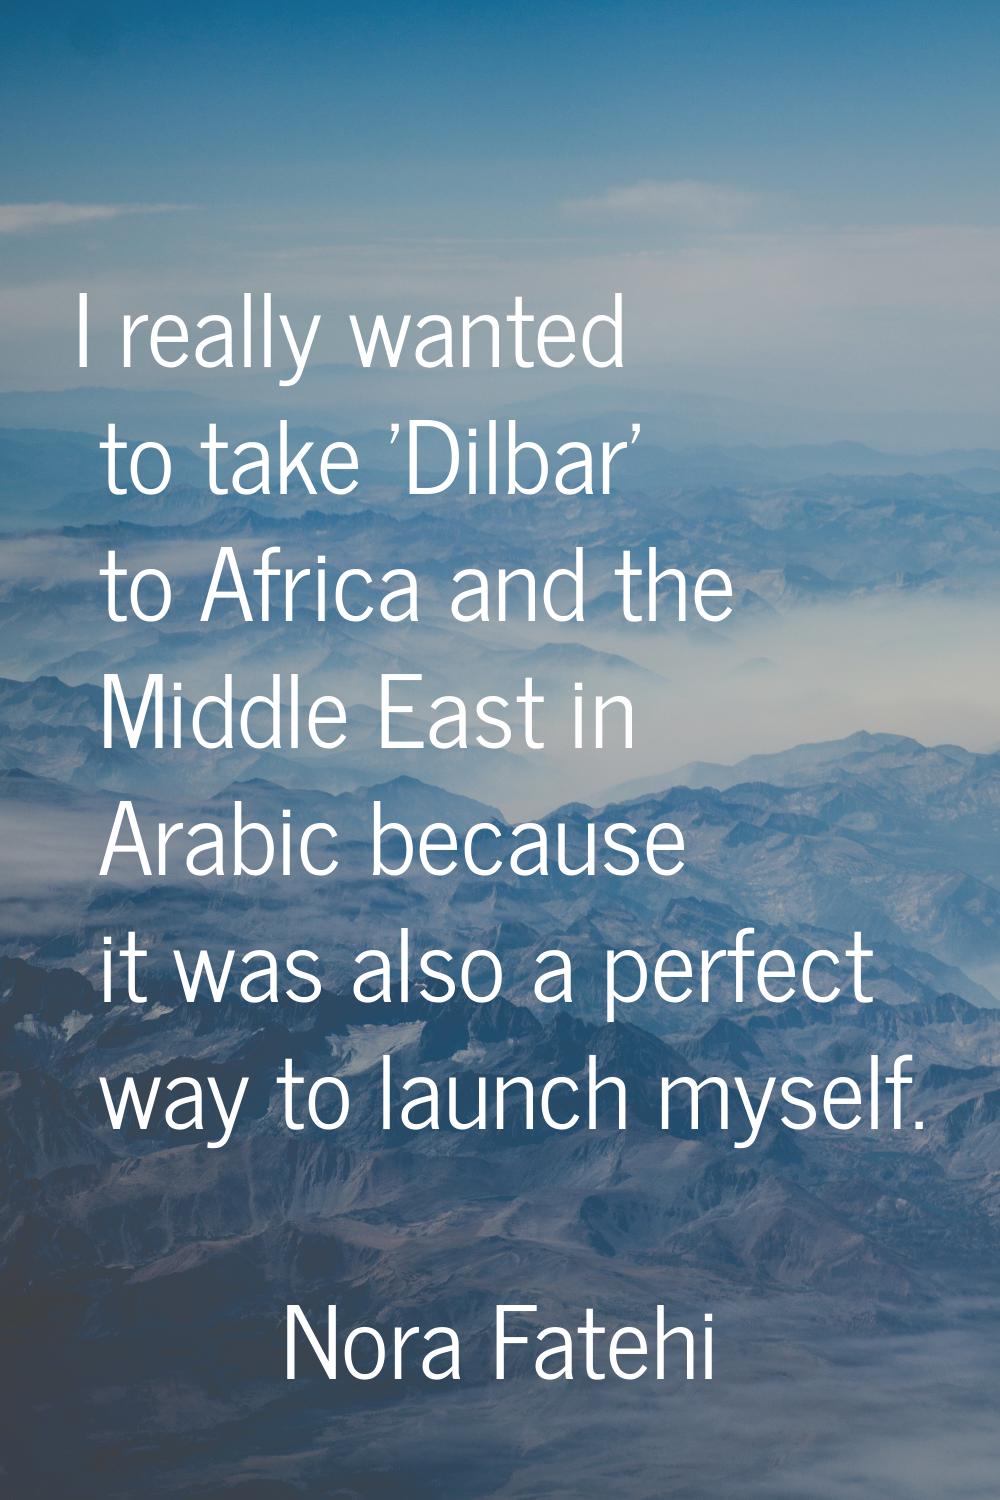 I really wanted to take 'Dilbar' to Africa and the Middle East in Arabic because it was also a perf